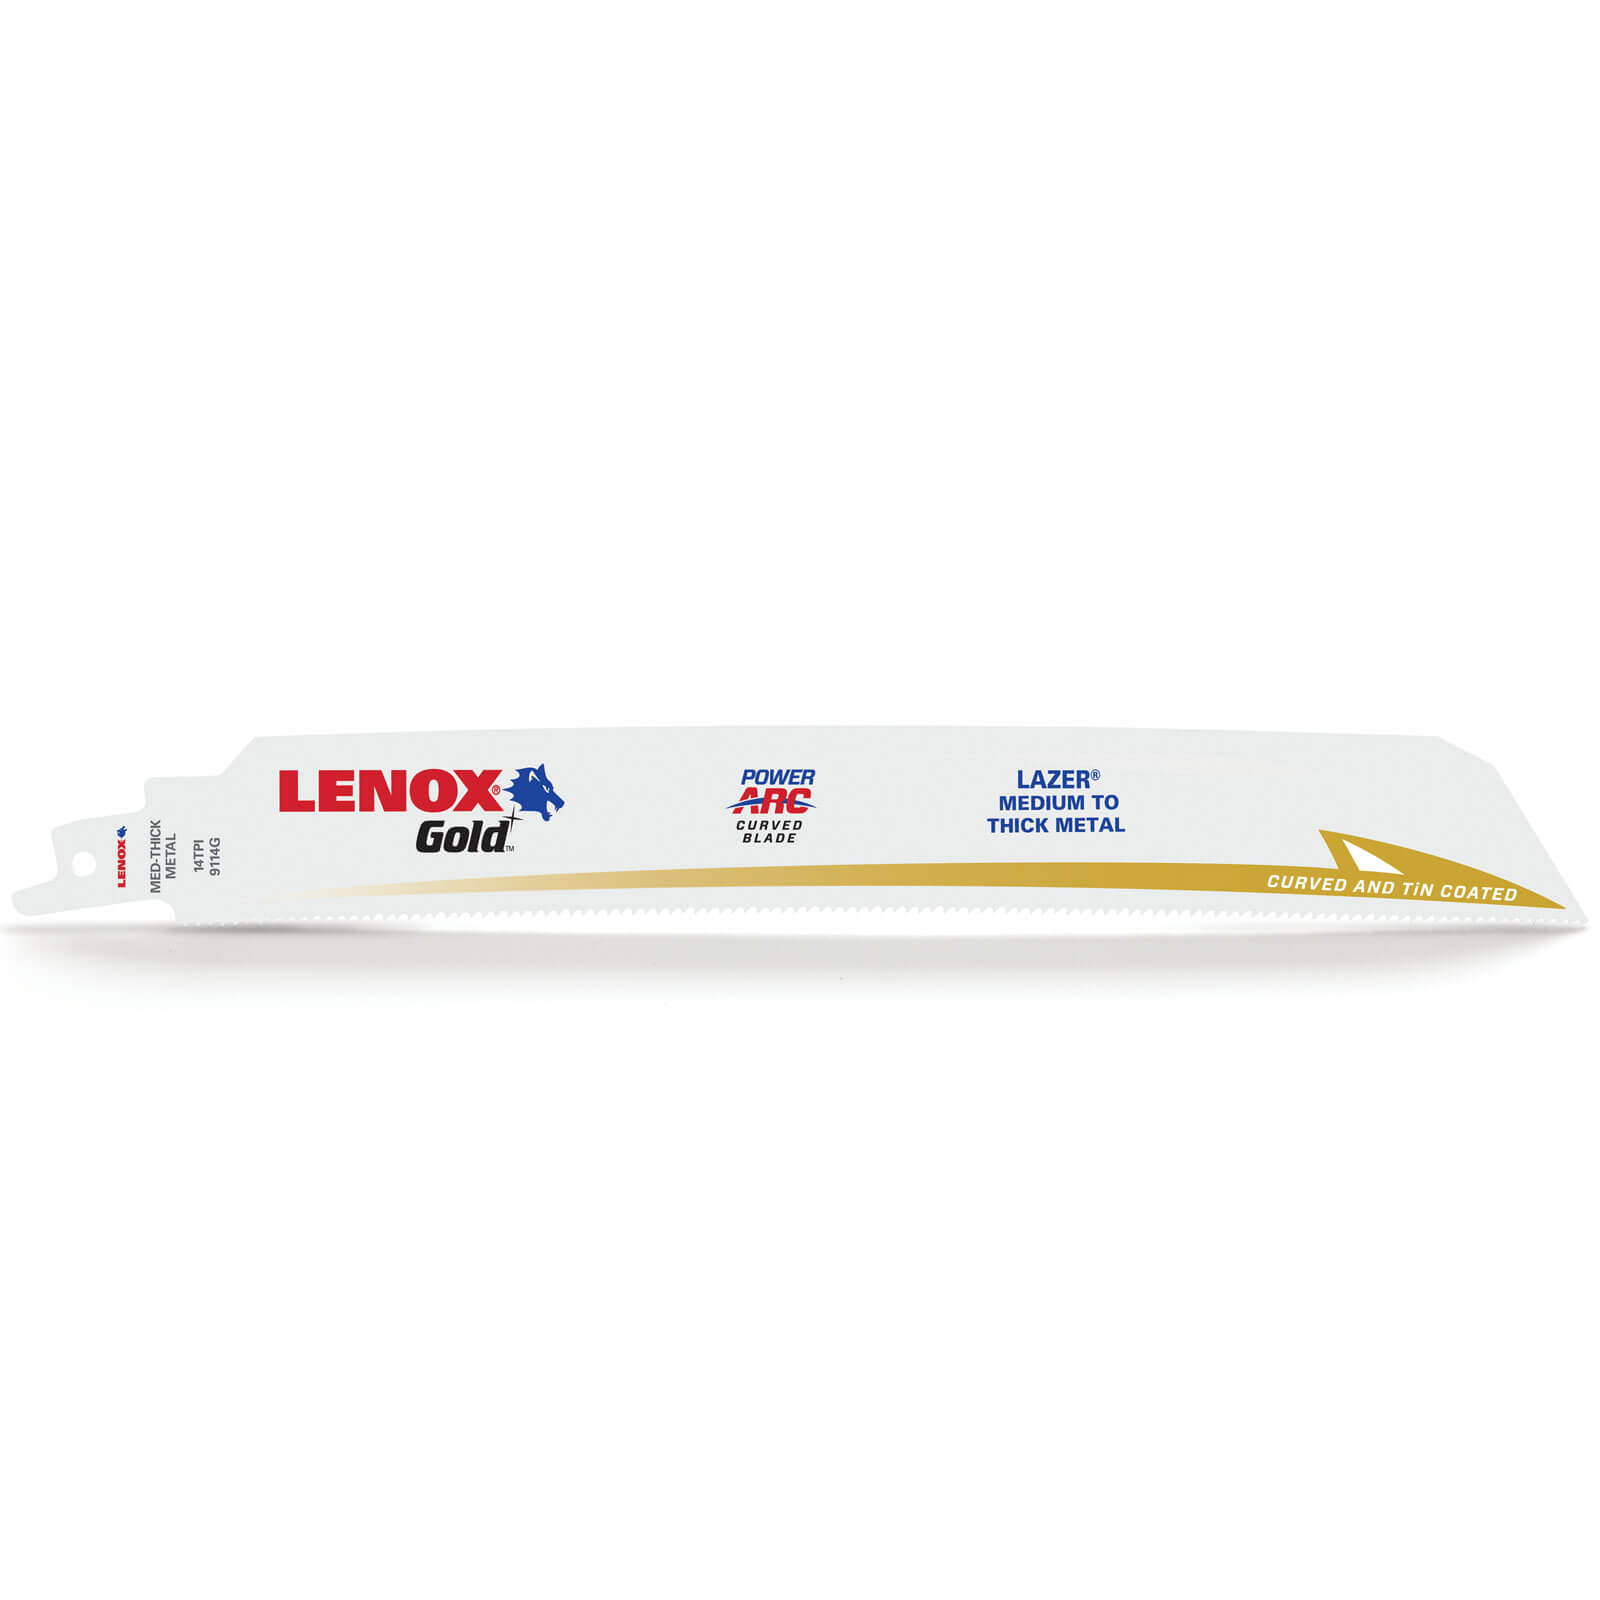 Image of Lenox Gold Lazer 14TPI Medium / Thick Metal Cutting Reciprocating Sabre Saw Blades 229mm Pack of 5